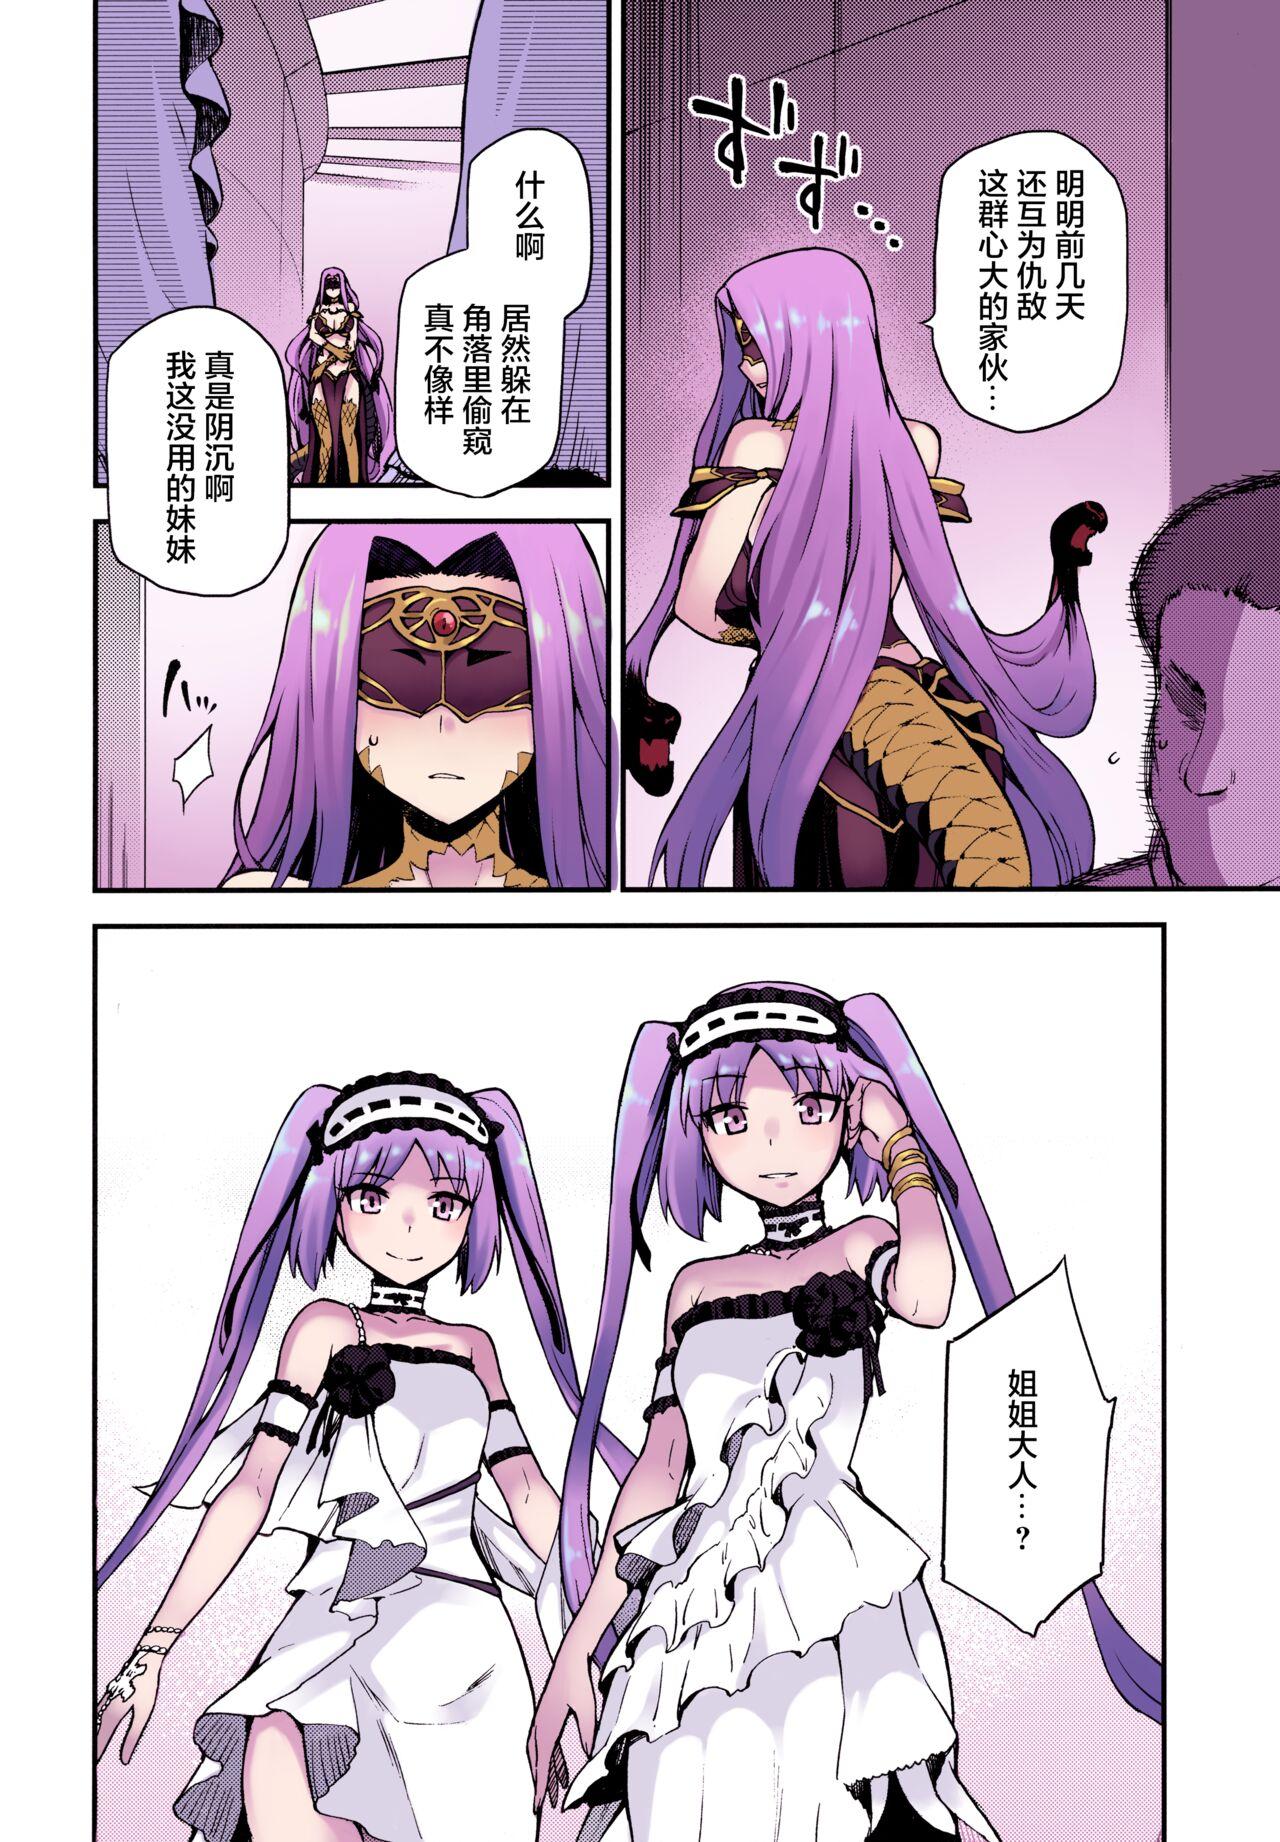 Furry Hebigami no Honnou - Fate grand order Mulher - Page 3